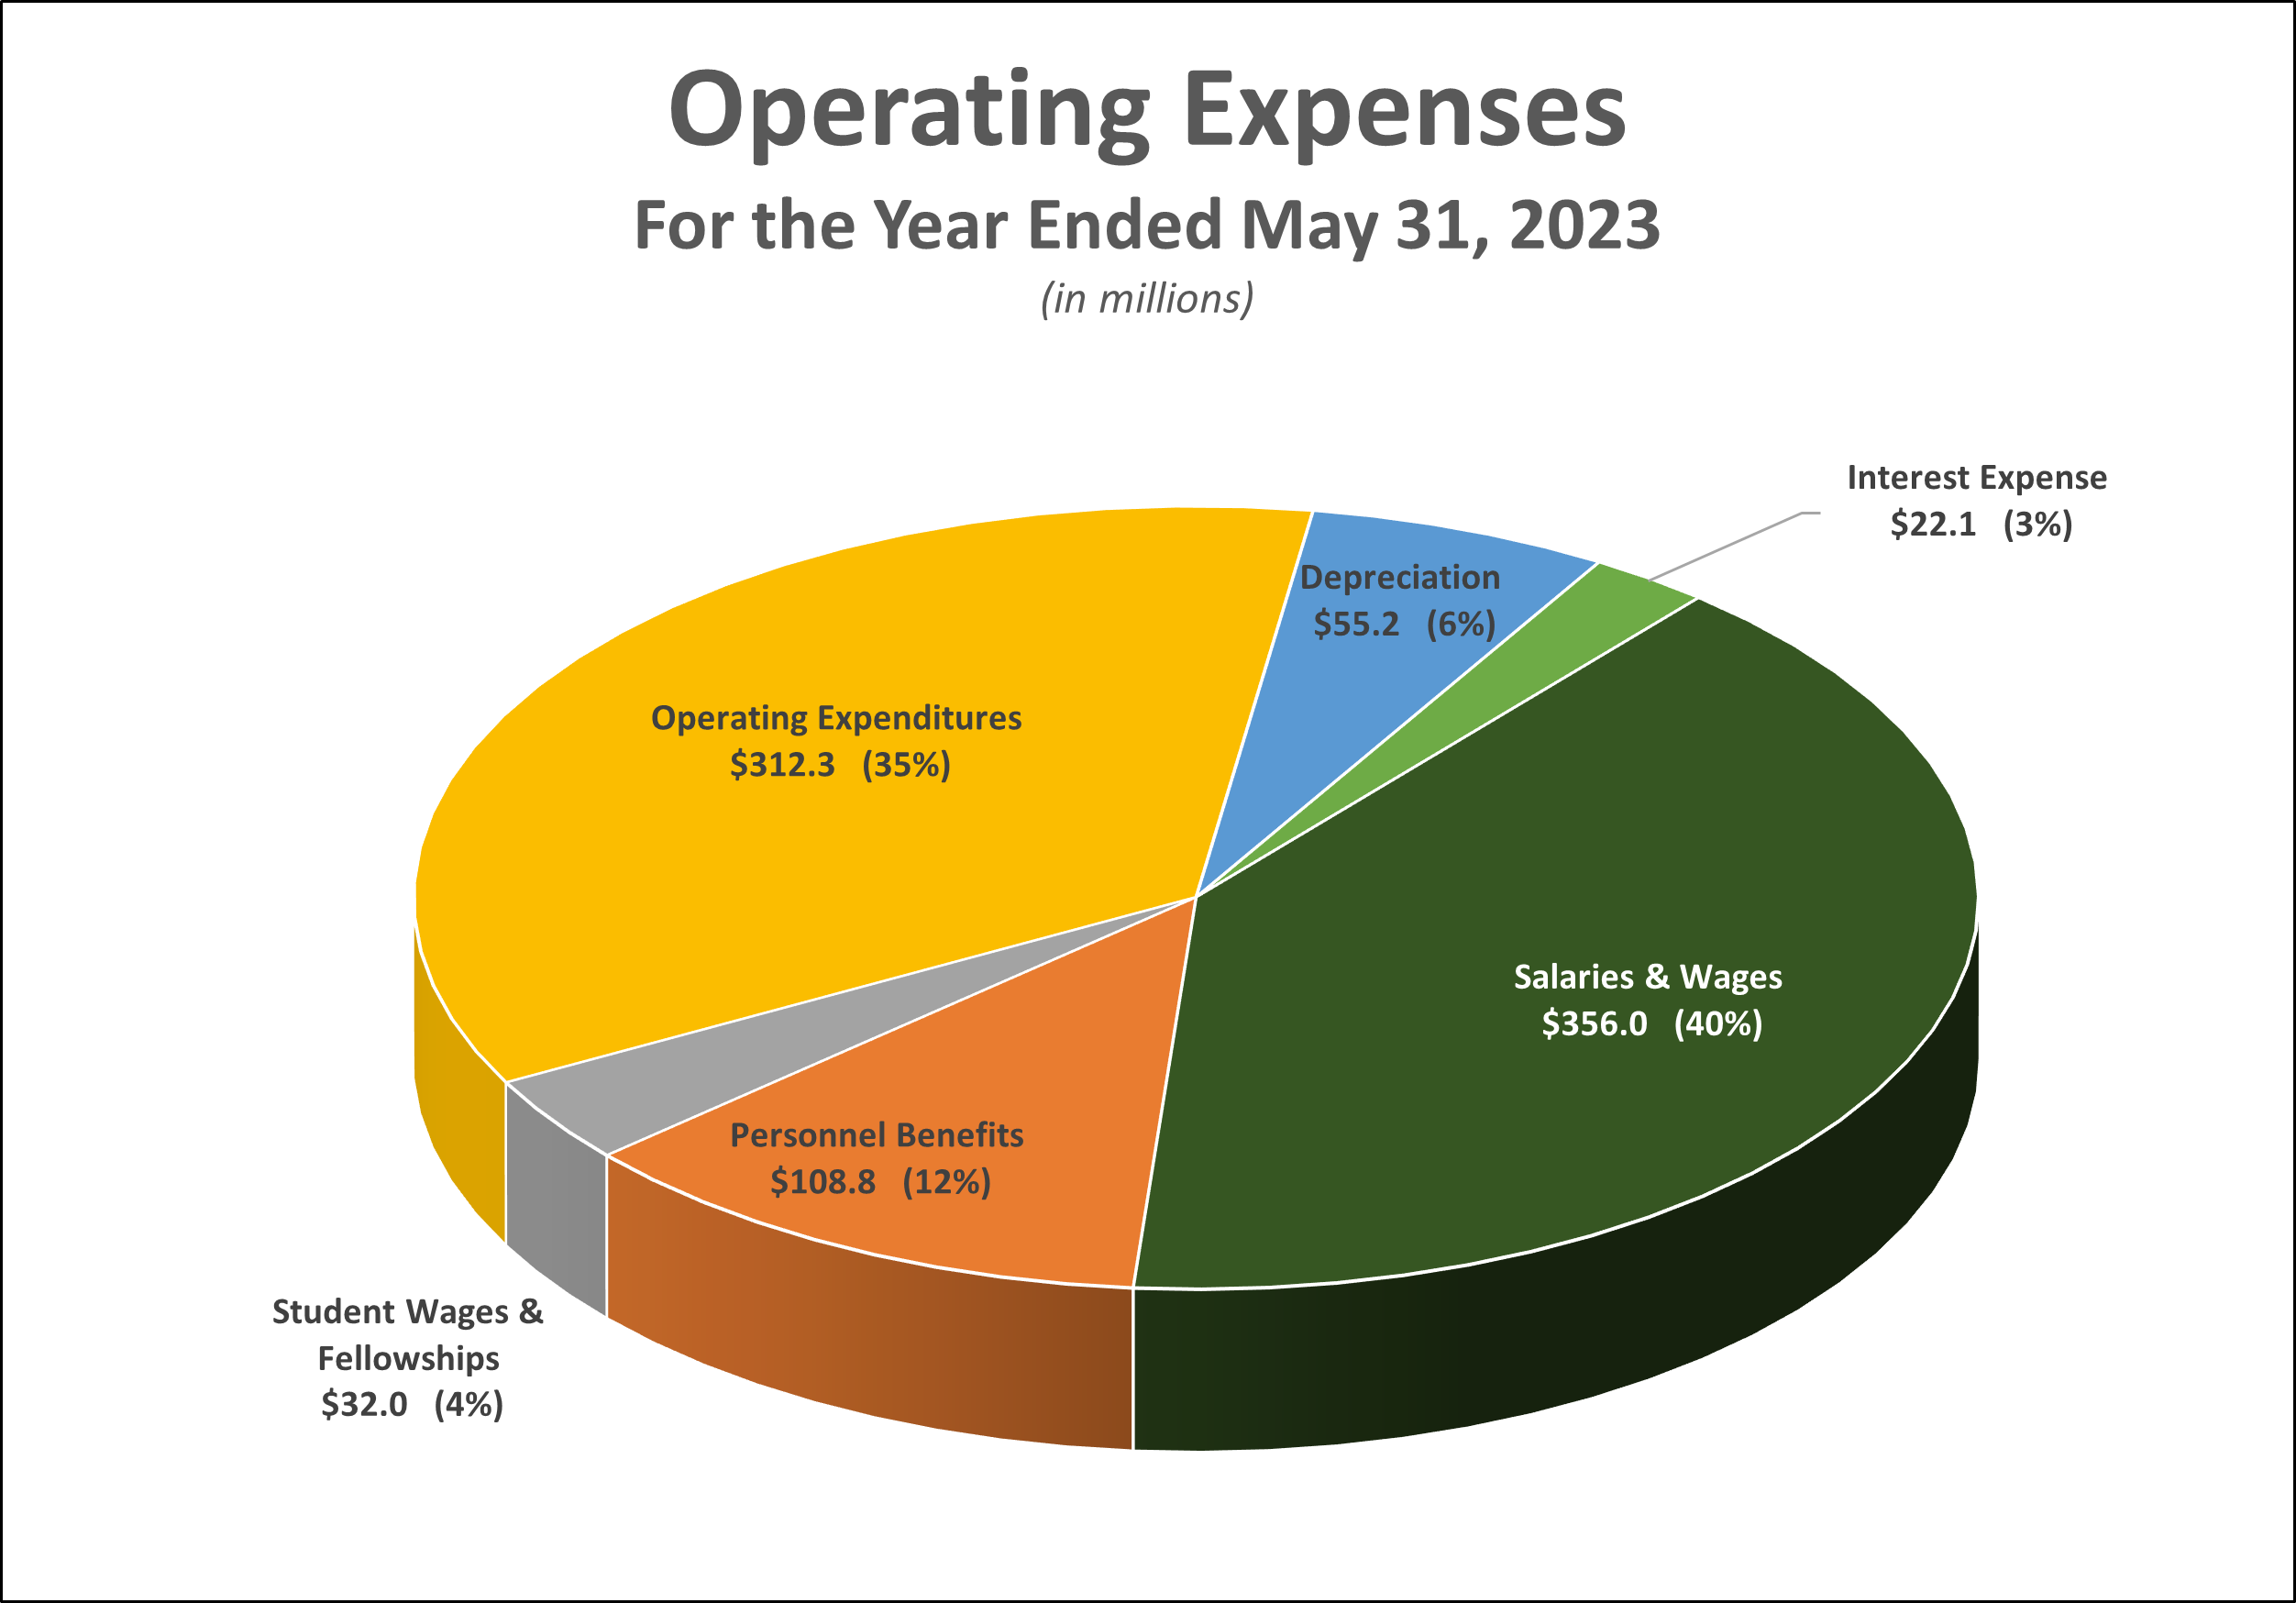 Pie Chart illustrating Operating Expenses for the Year Ended May 31, 2023